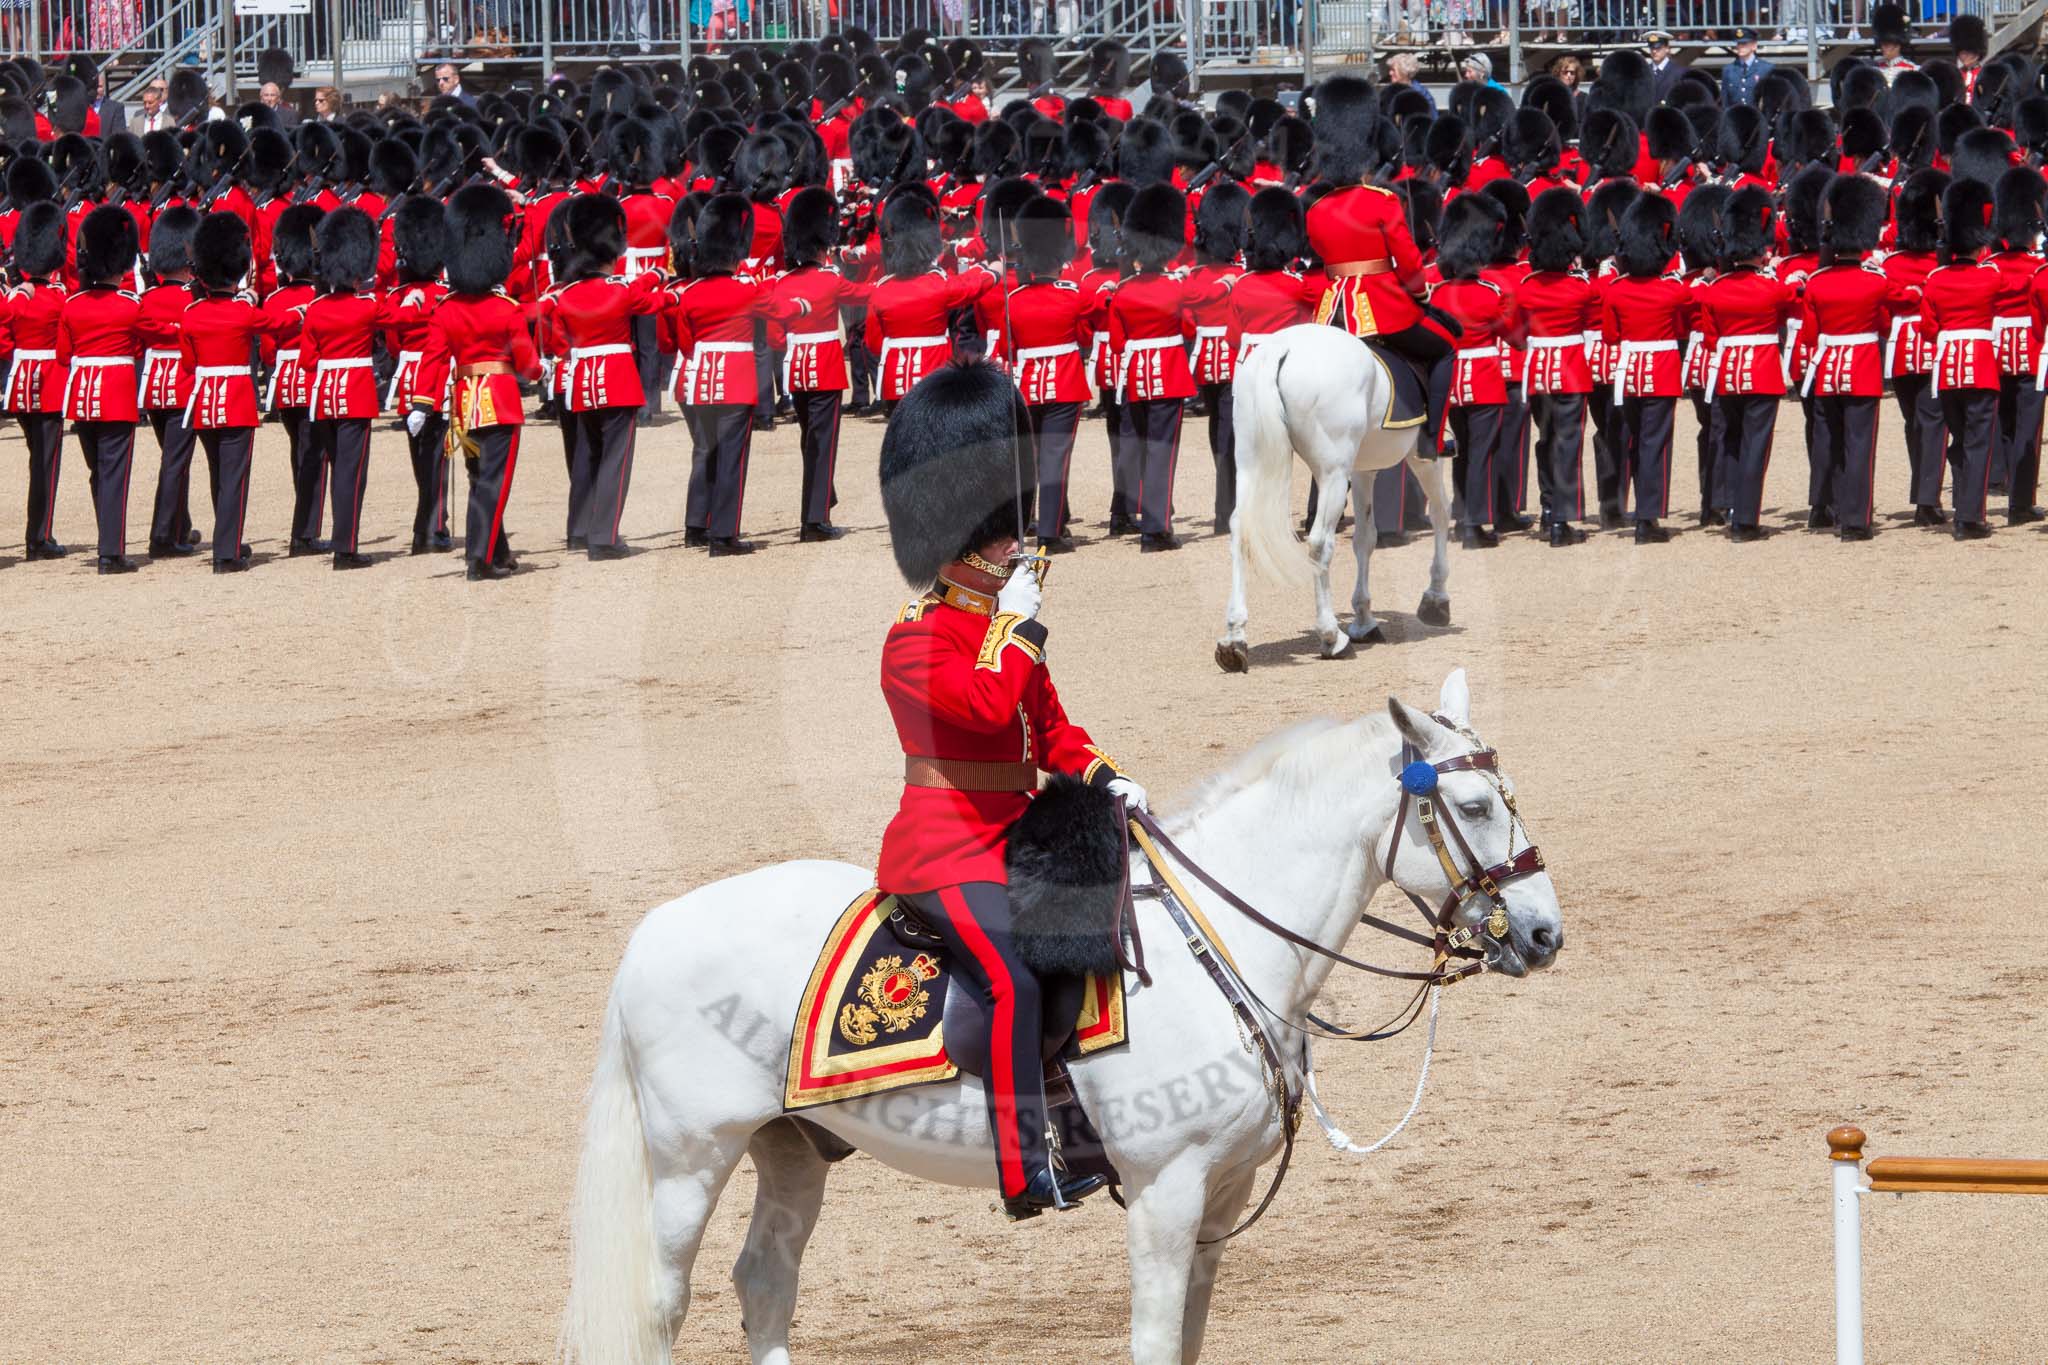 The Colonel's Review 2013: The Field Officer in Brigade Waiting, Lieutenant Colonel Dino Bossi, Welsh Guards, saluting Her Majesty during the March Past in Quick Time..
Horse Guards Parade, Westminster,
London SW1,

United Kingdom,
on 08 June 2013 at 11:45, image #700